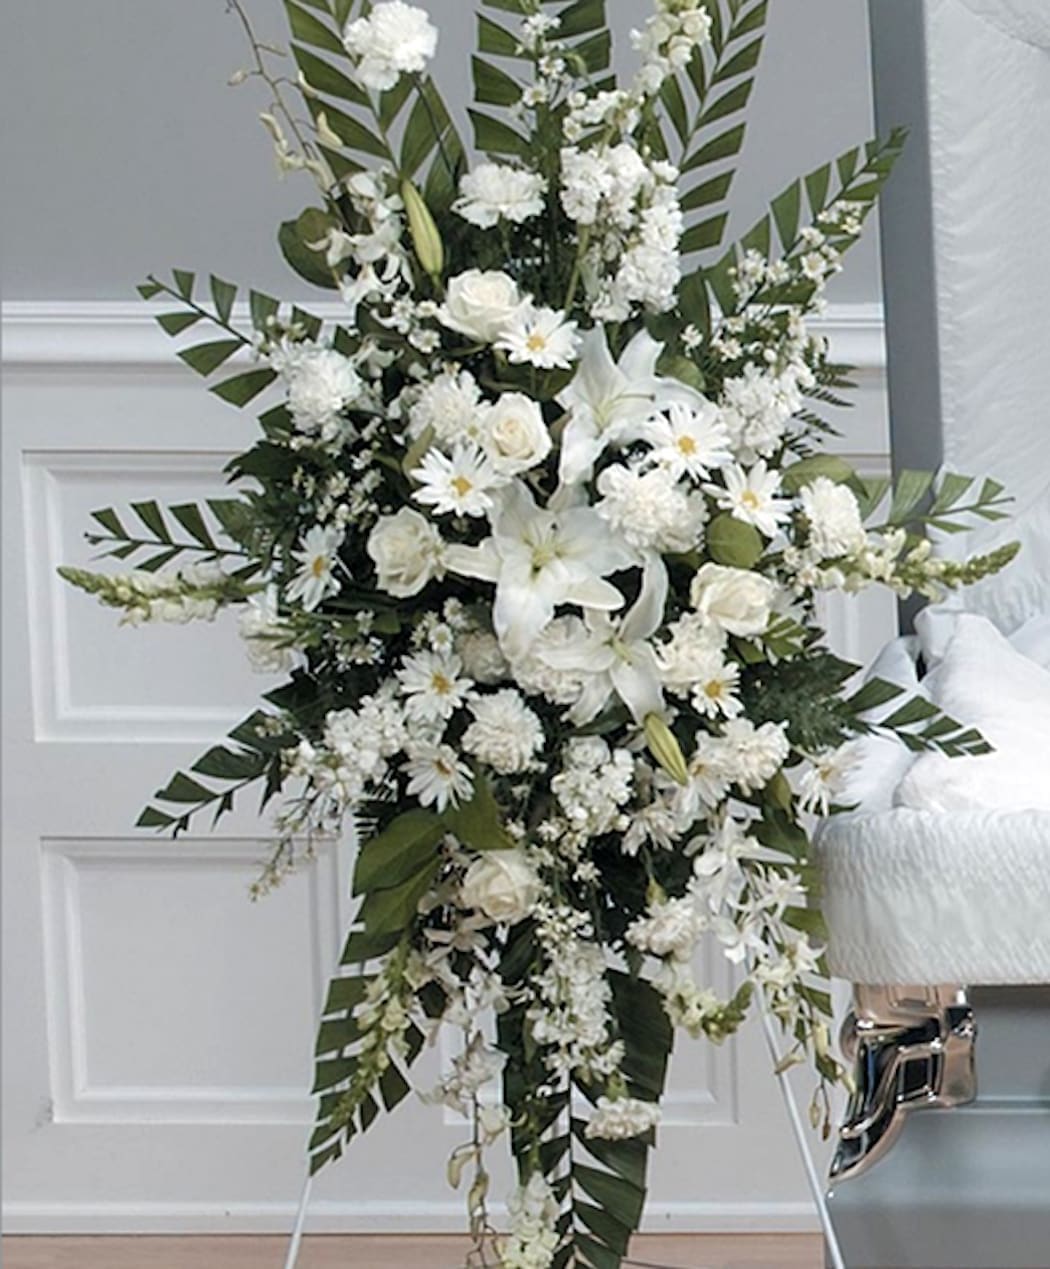 Graceful Elegance Standing Easel Spray - An elegant tribute in all whites to show respect and sympathy.